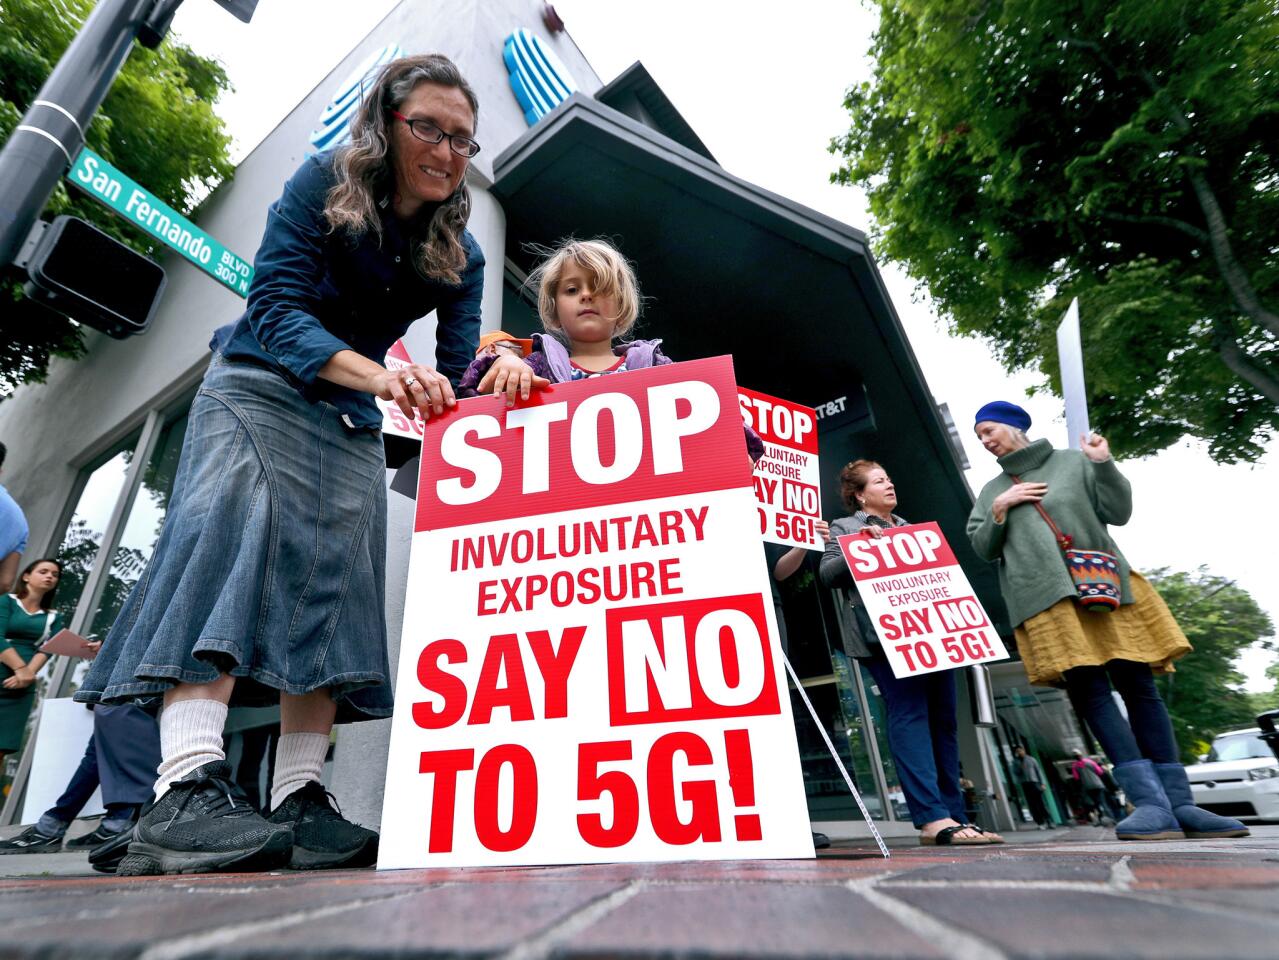 Photo Gallery: Locals protest against 5G at AT&T